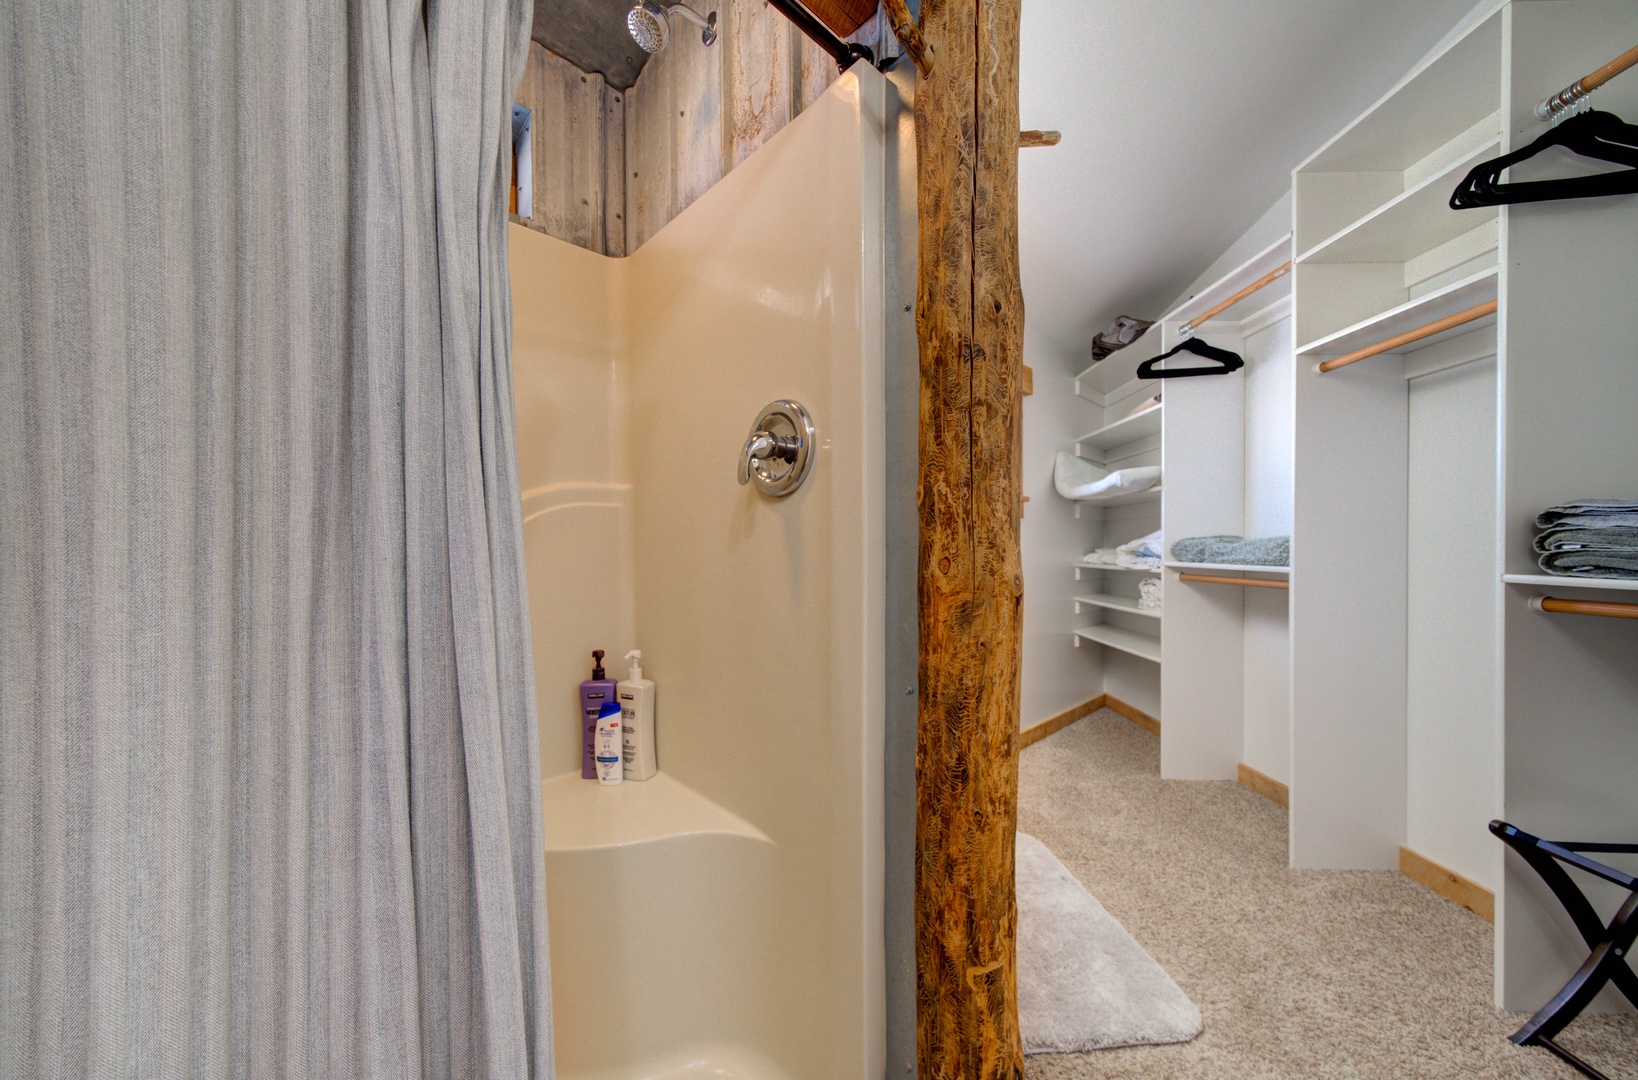 Livingston Vacation Rentals, OFB Sunset Grove - Shower and tons of closet space in the ensuite bathroom